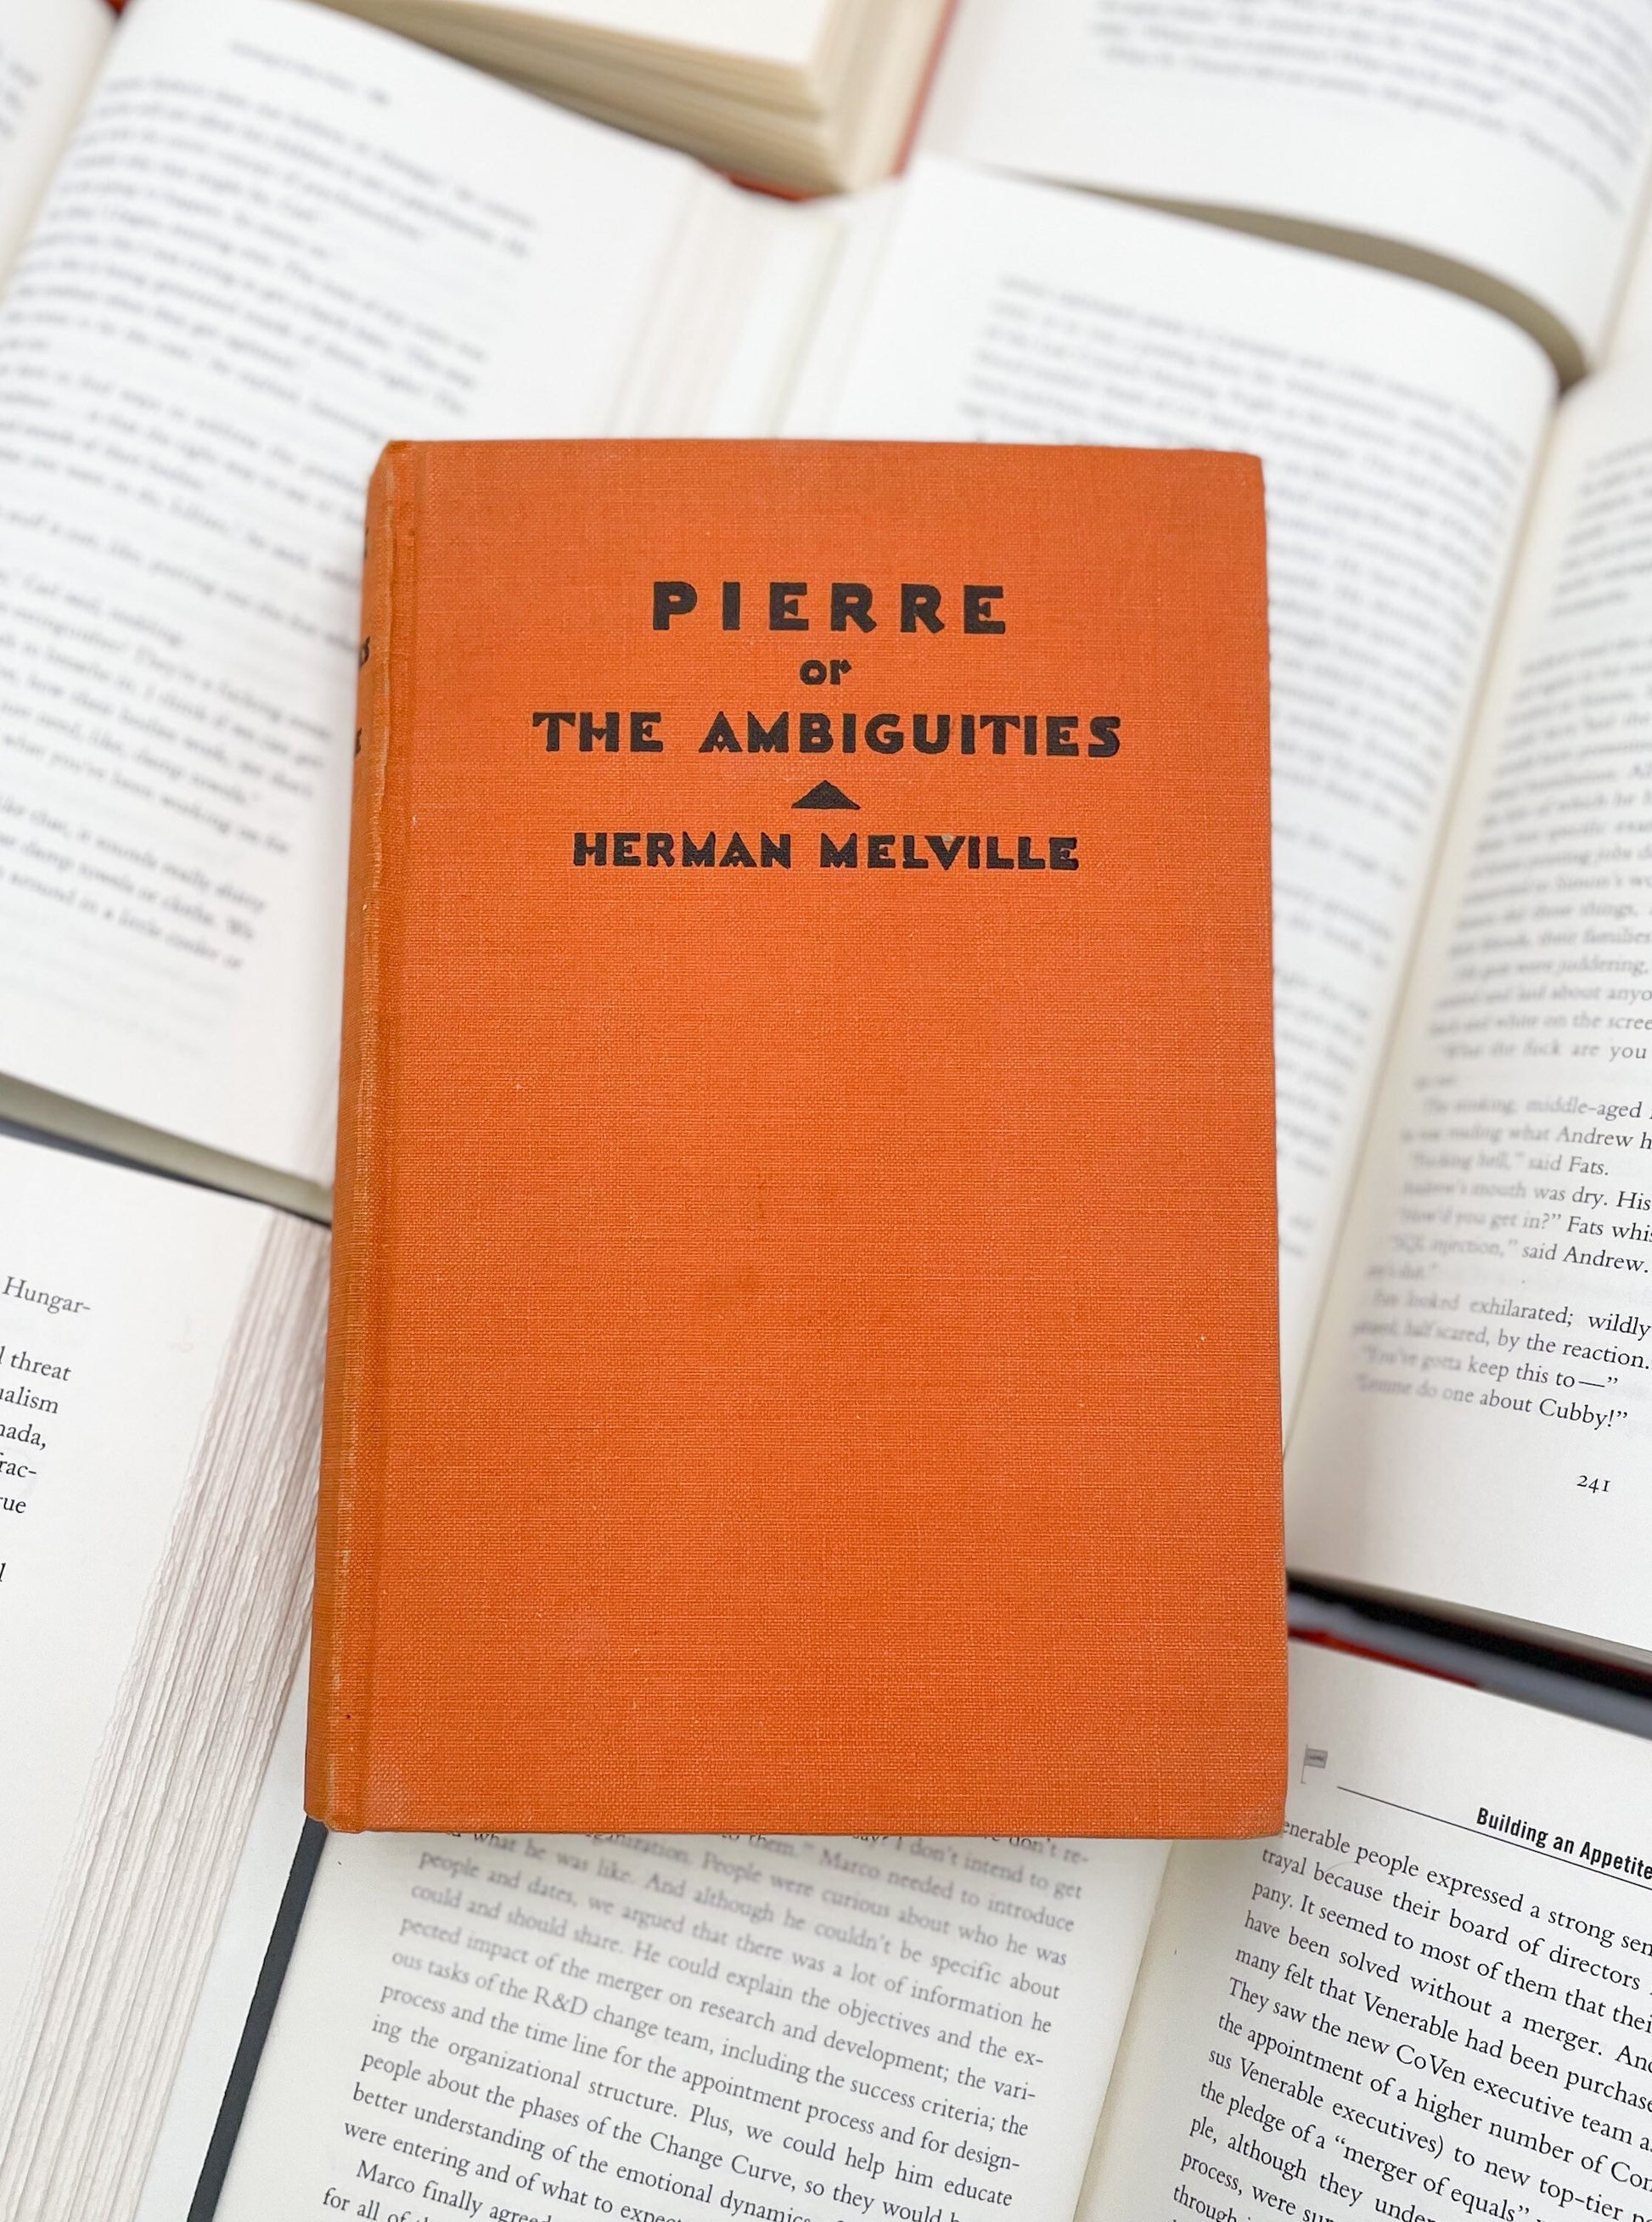 First Edition by Herman Melville, Pierre or the Ambiguities